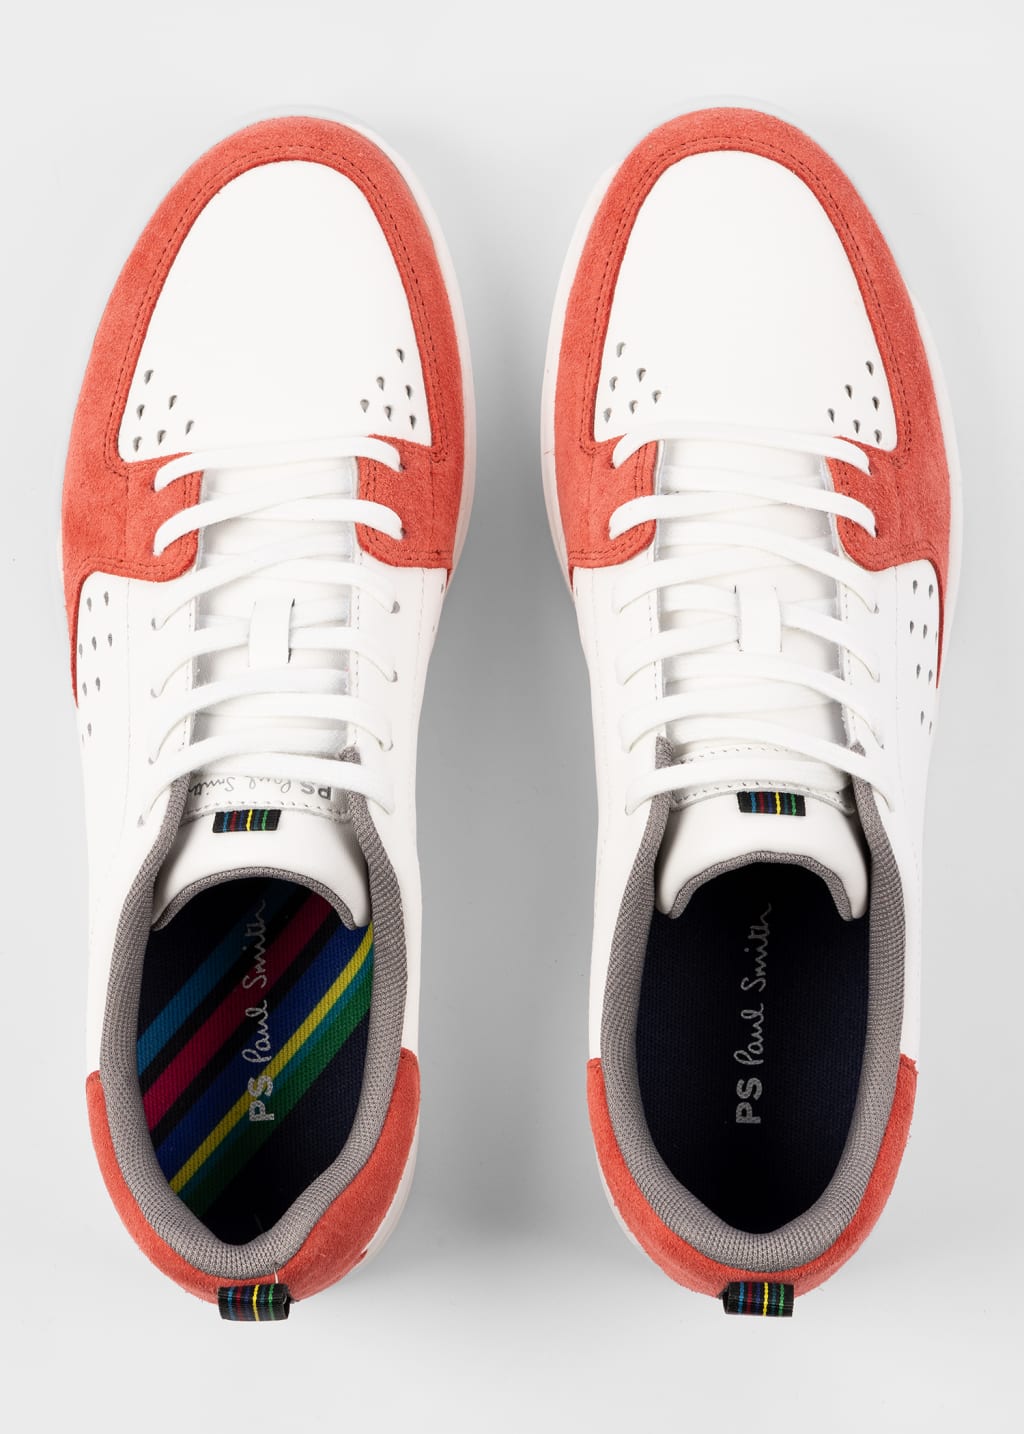 Pair View - White and Coral 'Cosmo' Trainers Paul Smith